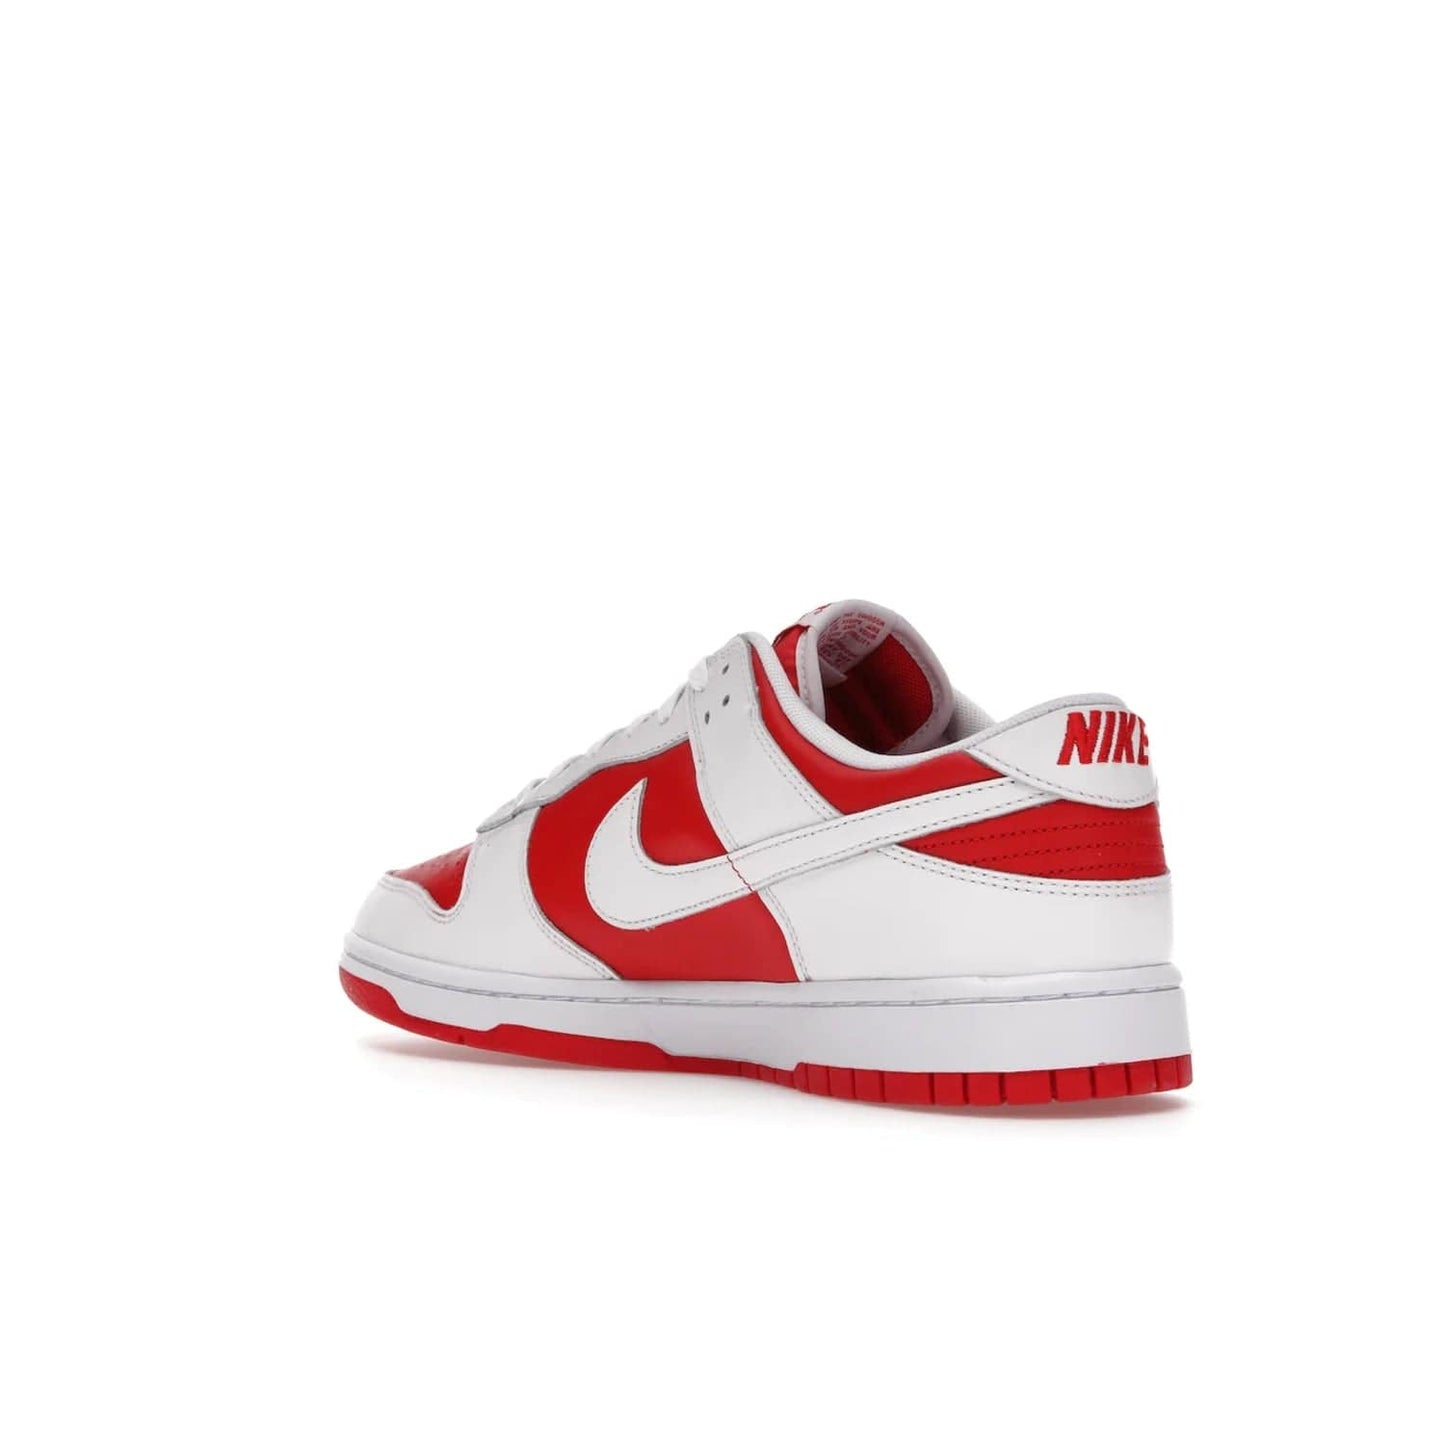 Nike Dunk Low Championship Red (2021) - Image 24 - Only at www.BallersClubKickz.com - A bold and stylish Nike Dunk Low Championship Red from 2021 with a classic retro design. University Red upper, white leather overlays and Swooshes, and a woven tongue label. Make a statement with these sleek kicks!